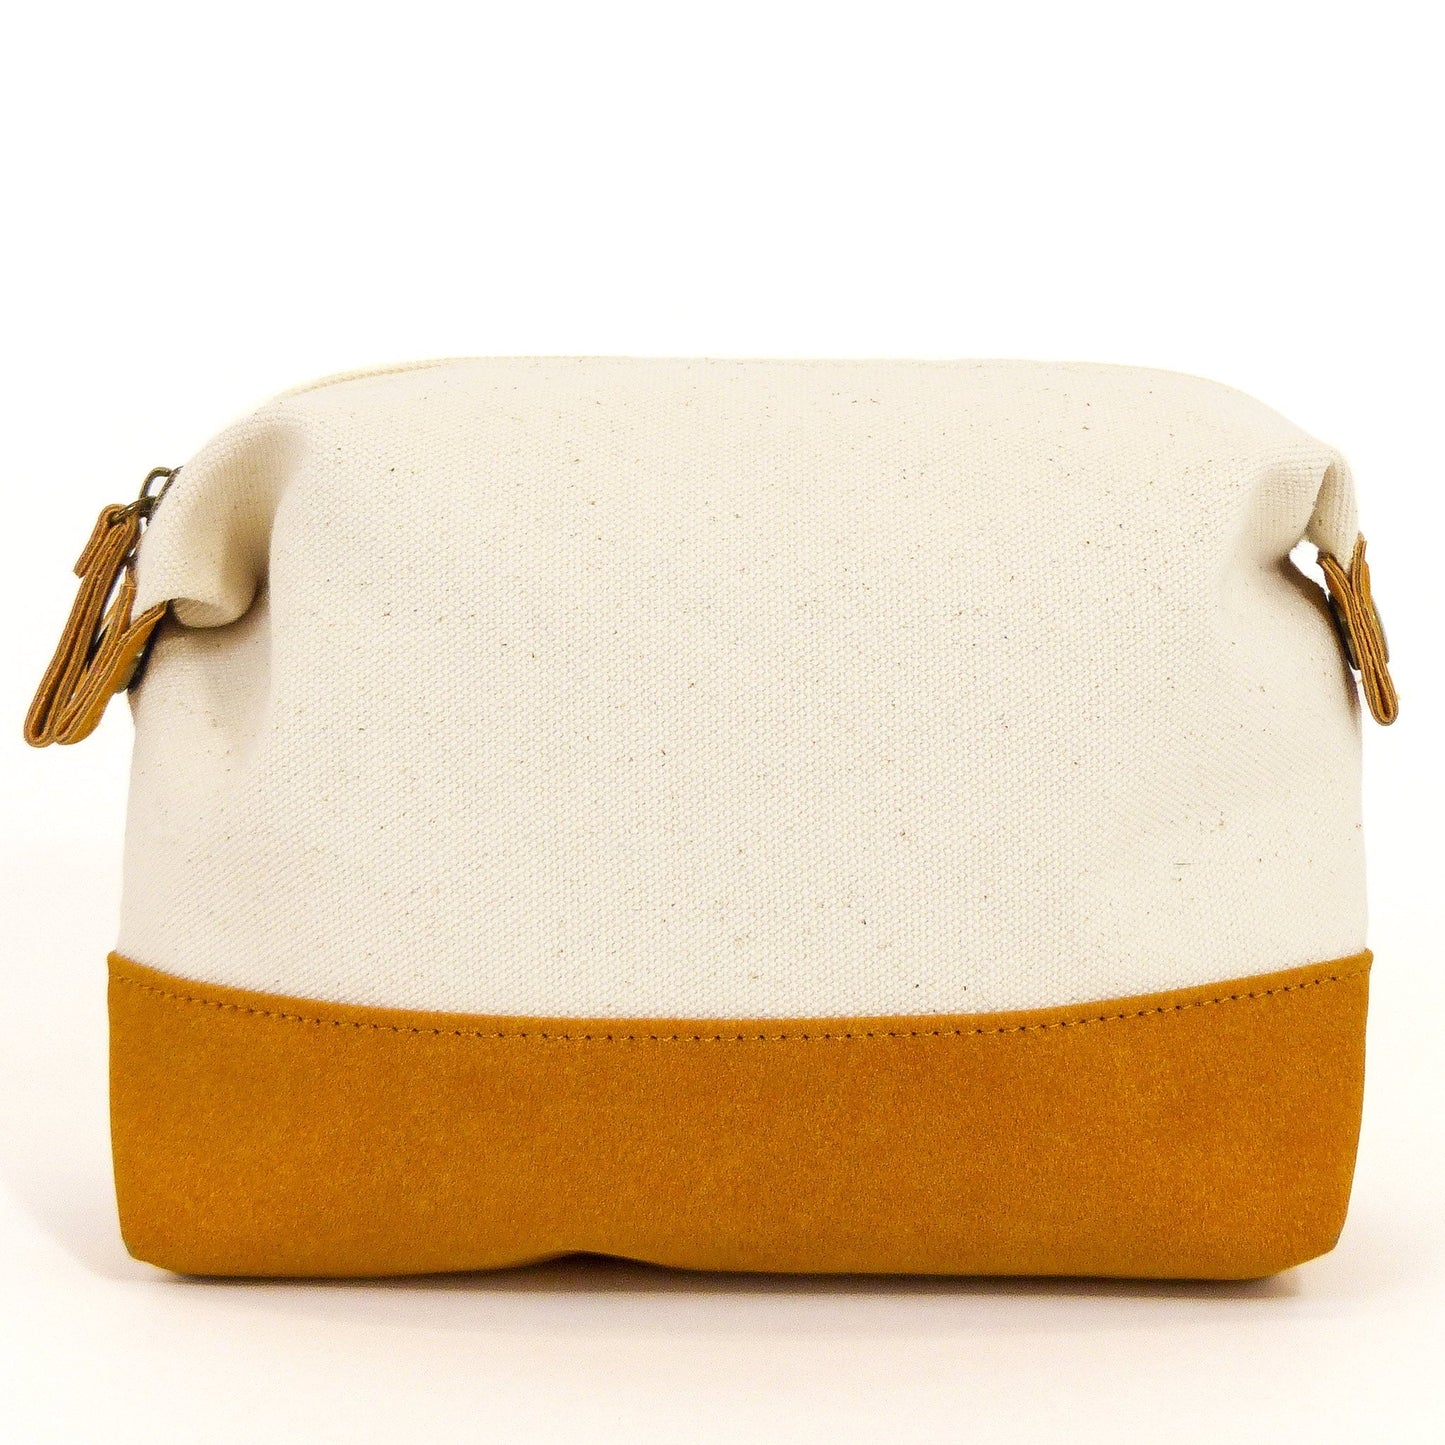 Travel Buddy Toiletry Bag - Bliss Curry/Cream - Saltwater Bodega